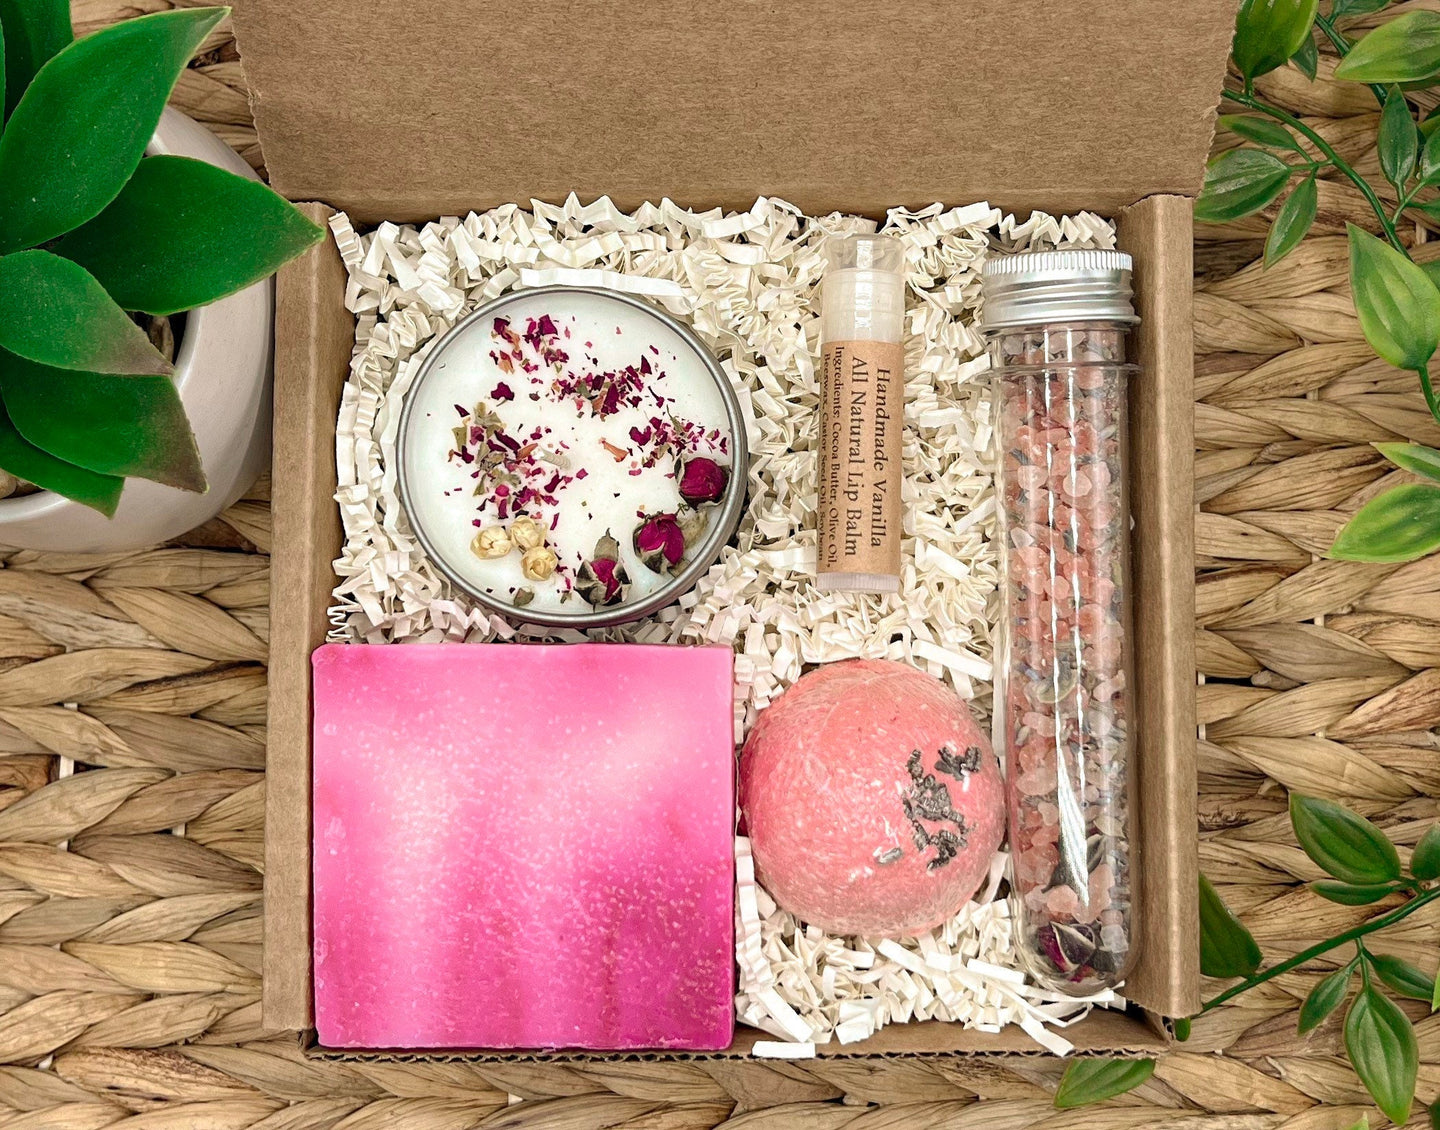 Mothers Day Self Care Gifts, Gift Box for Mothers Day, From Daughter Mothers Day Gift